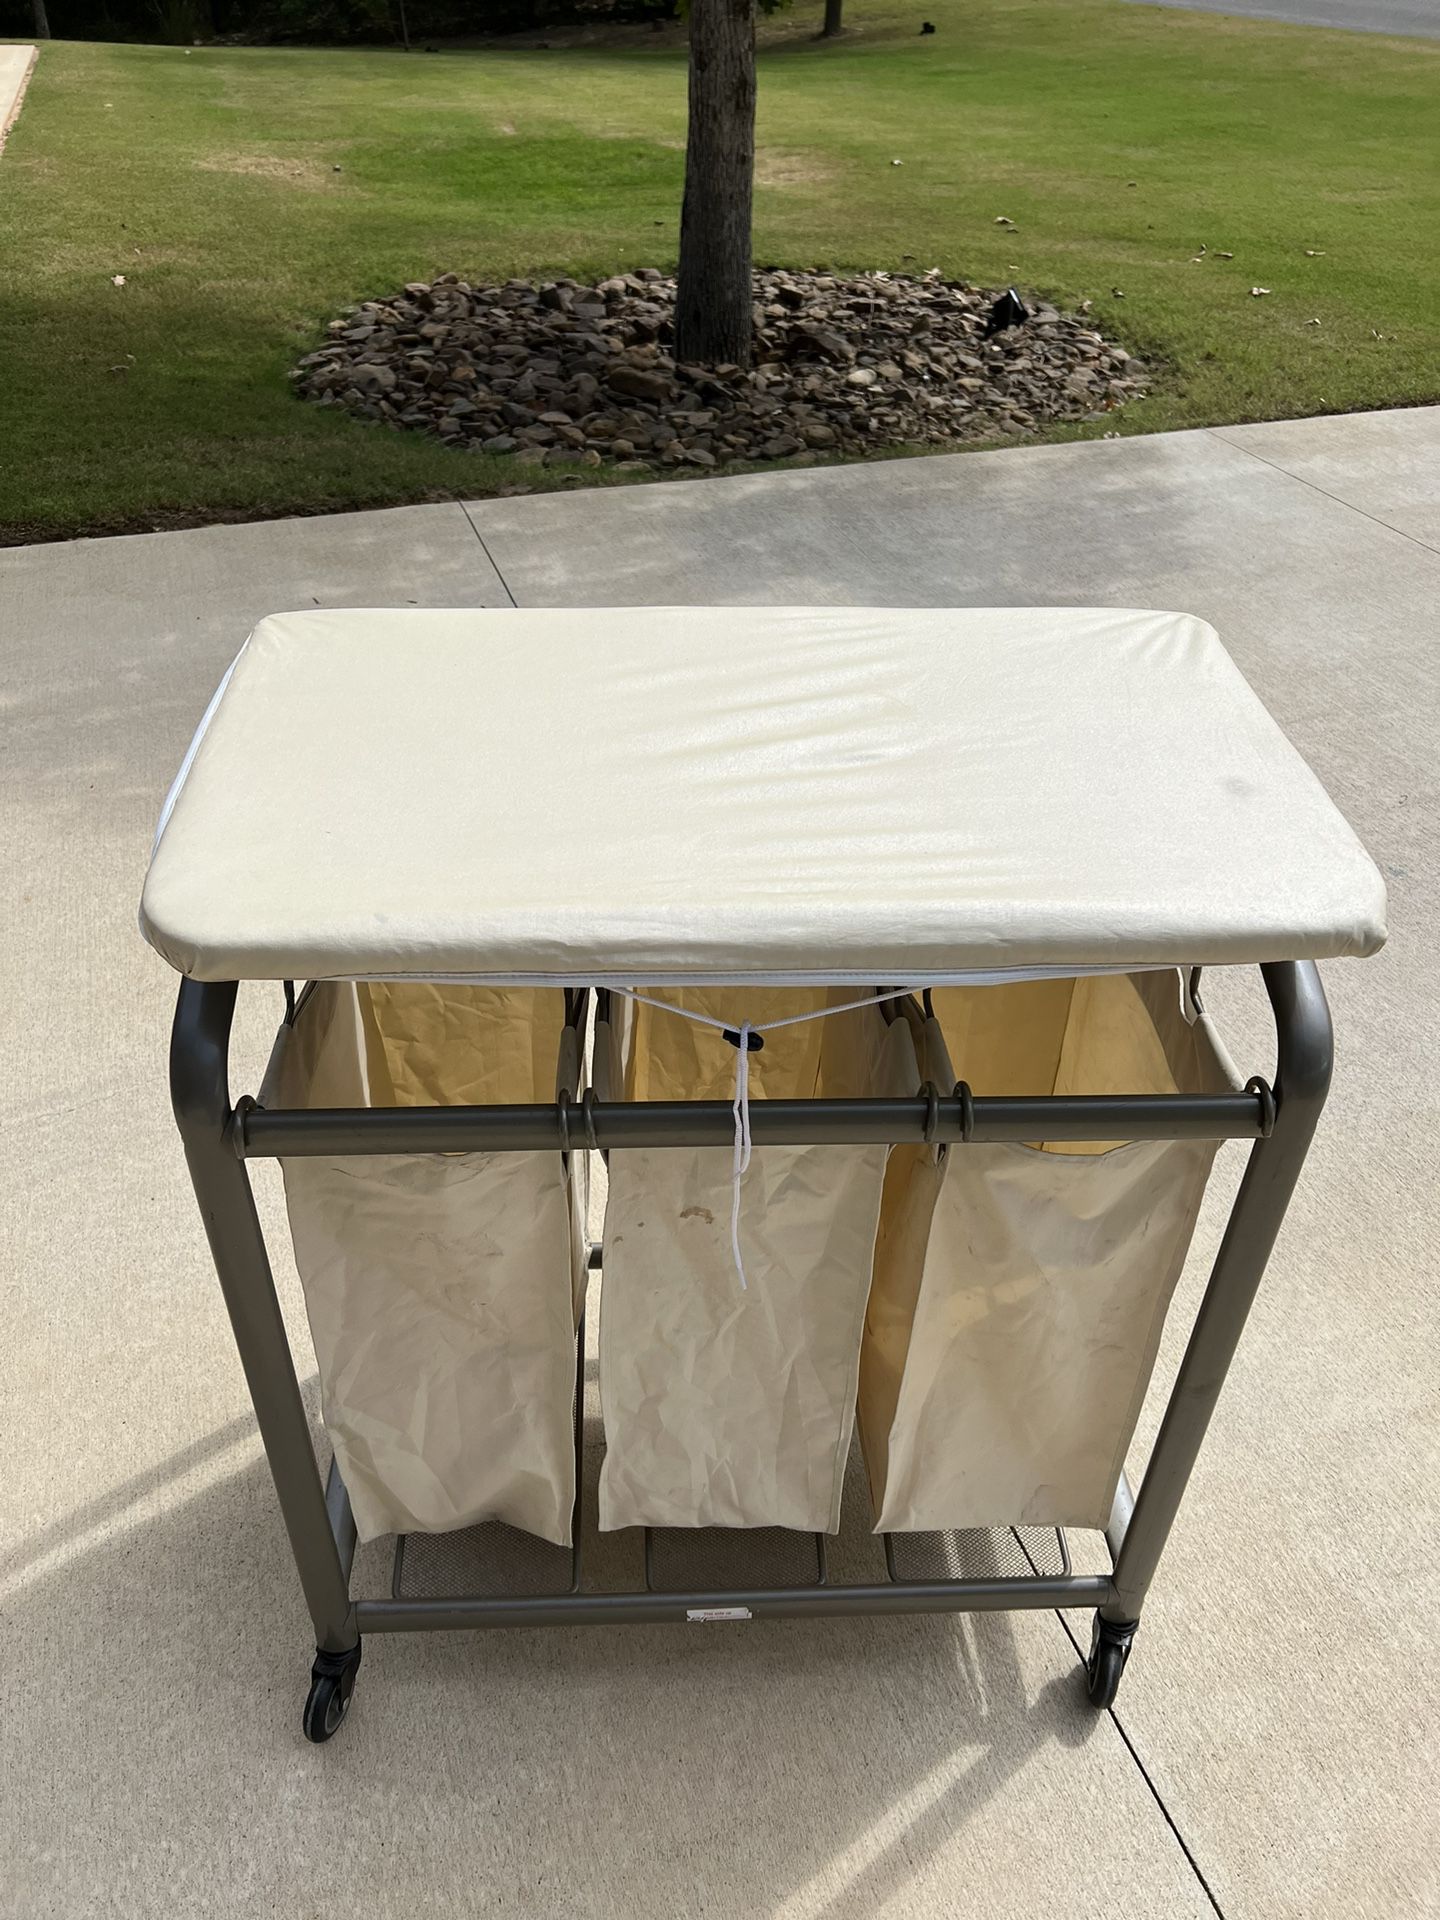 Rolling Laundry Sorter with Ironing Board